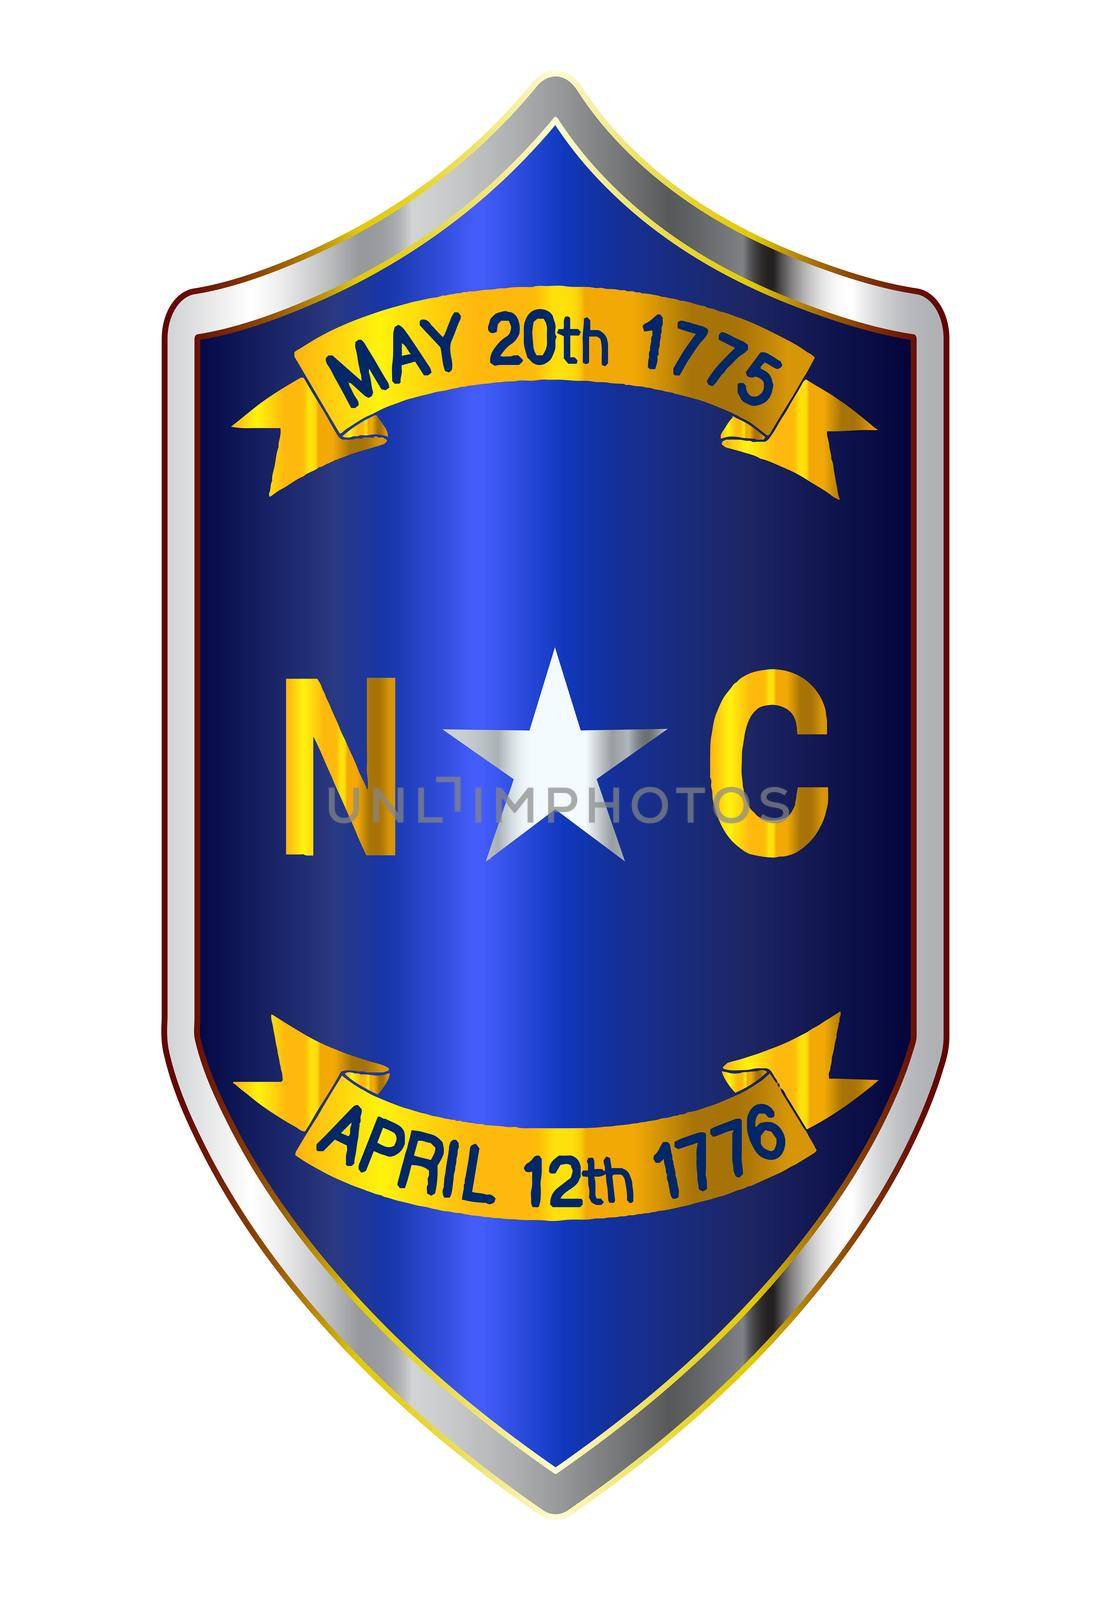 A typical crusader type shield with the state flag of North Carolina all isolated on a white background